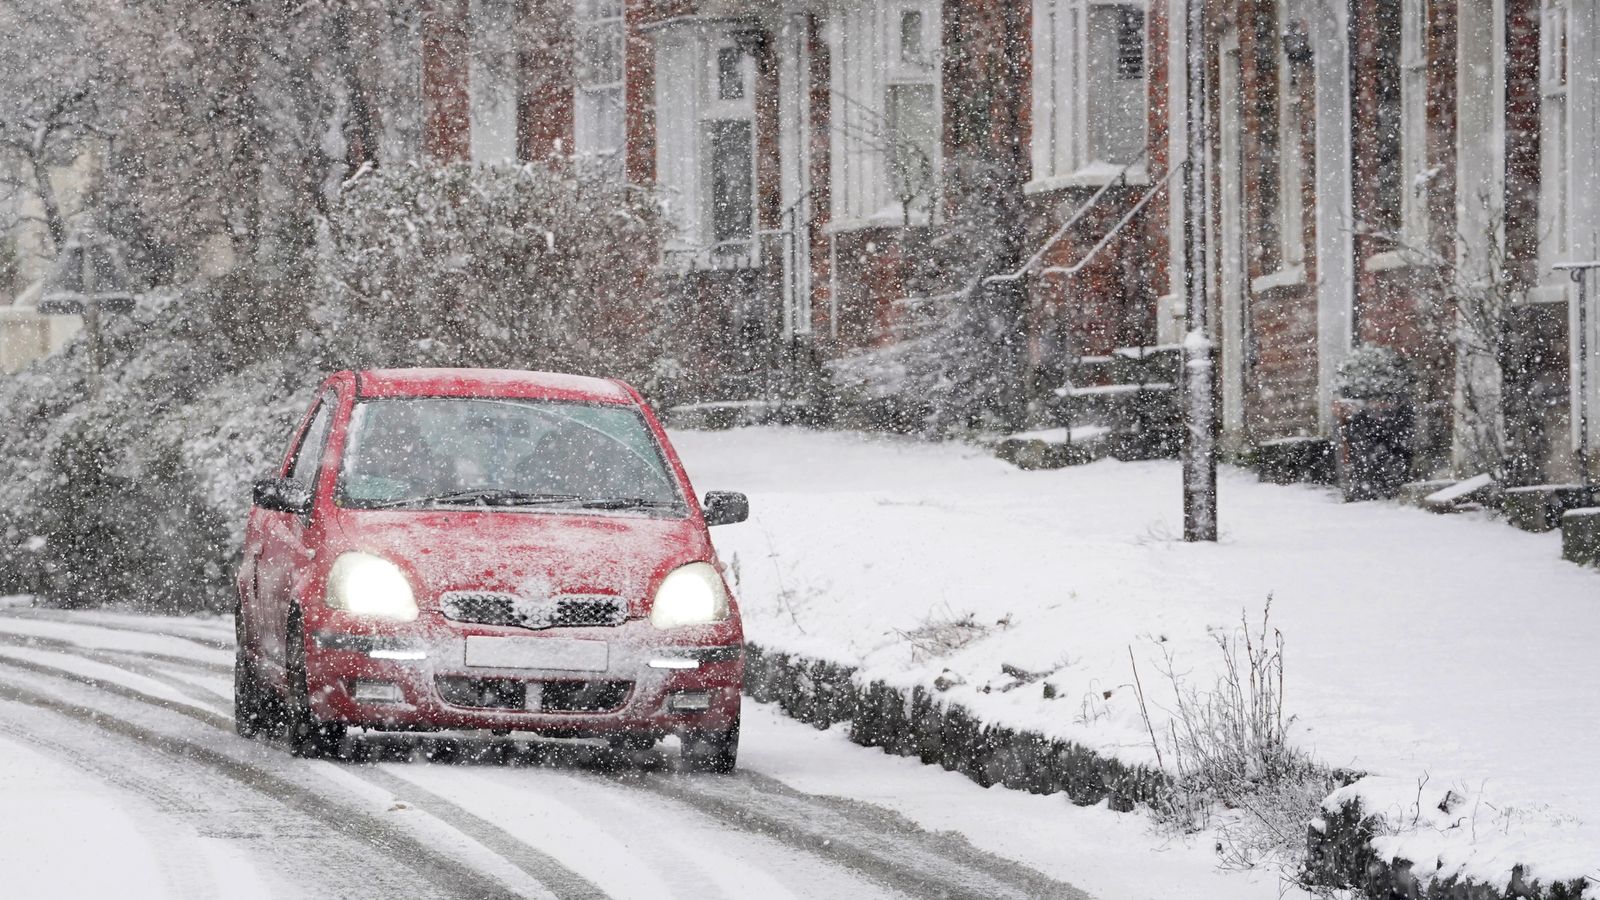 UK weather: 'Severe' alert on the roads as freezing temperatures and snow forecast